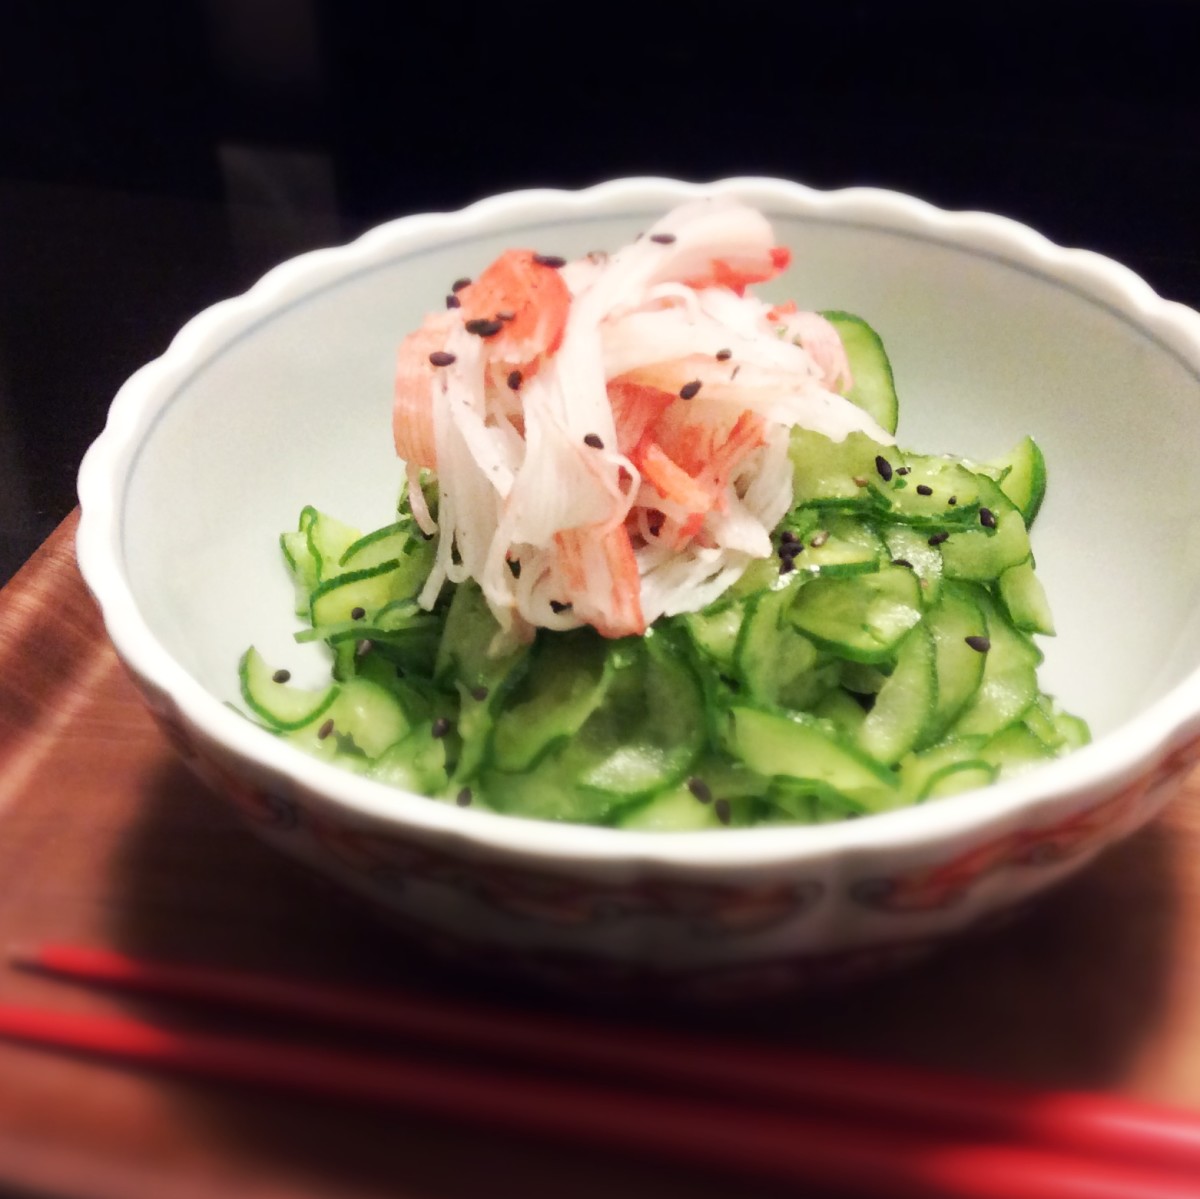 Sunomono is a traditional Japanese salad that is usually served, with other dishes, alongside rice.